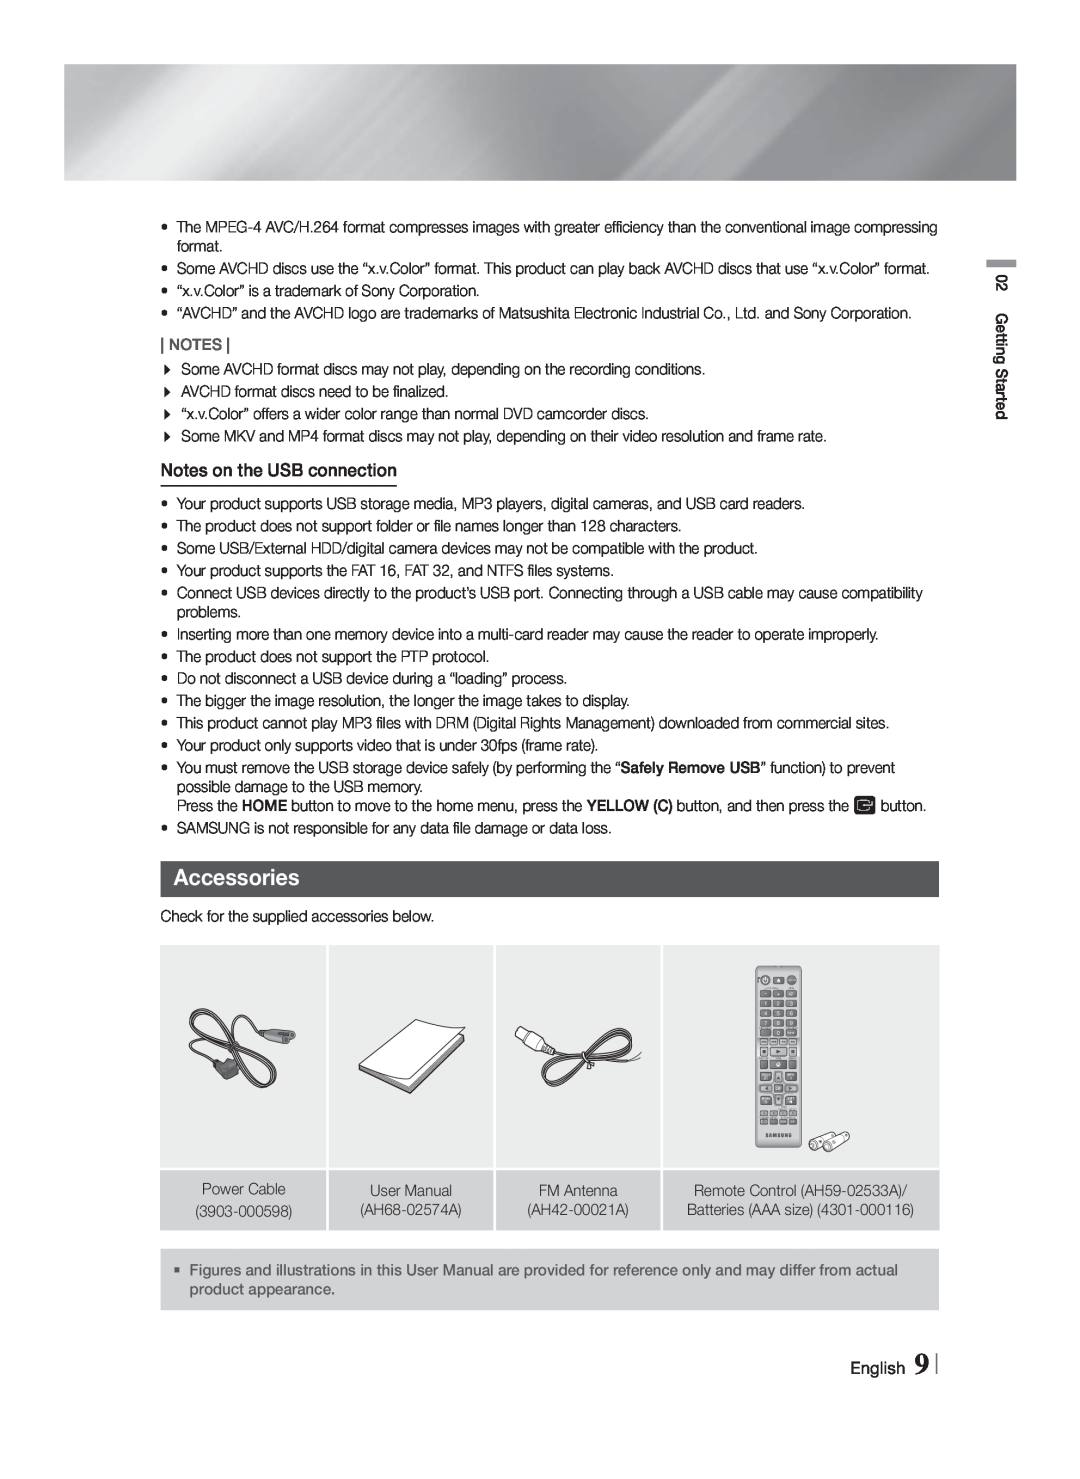 Samsung HTF4500ZA user manual Accessories, Notes on the USB connection, English 9 